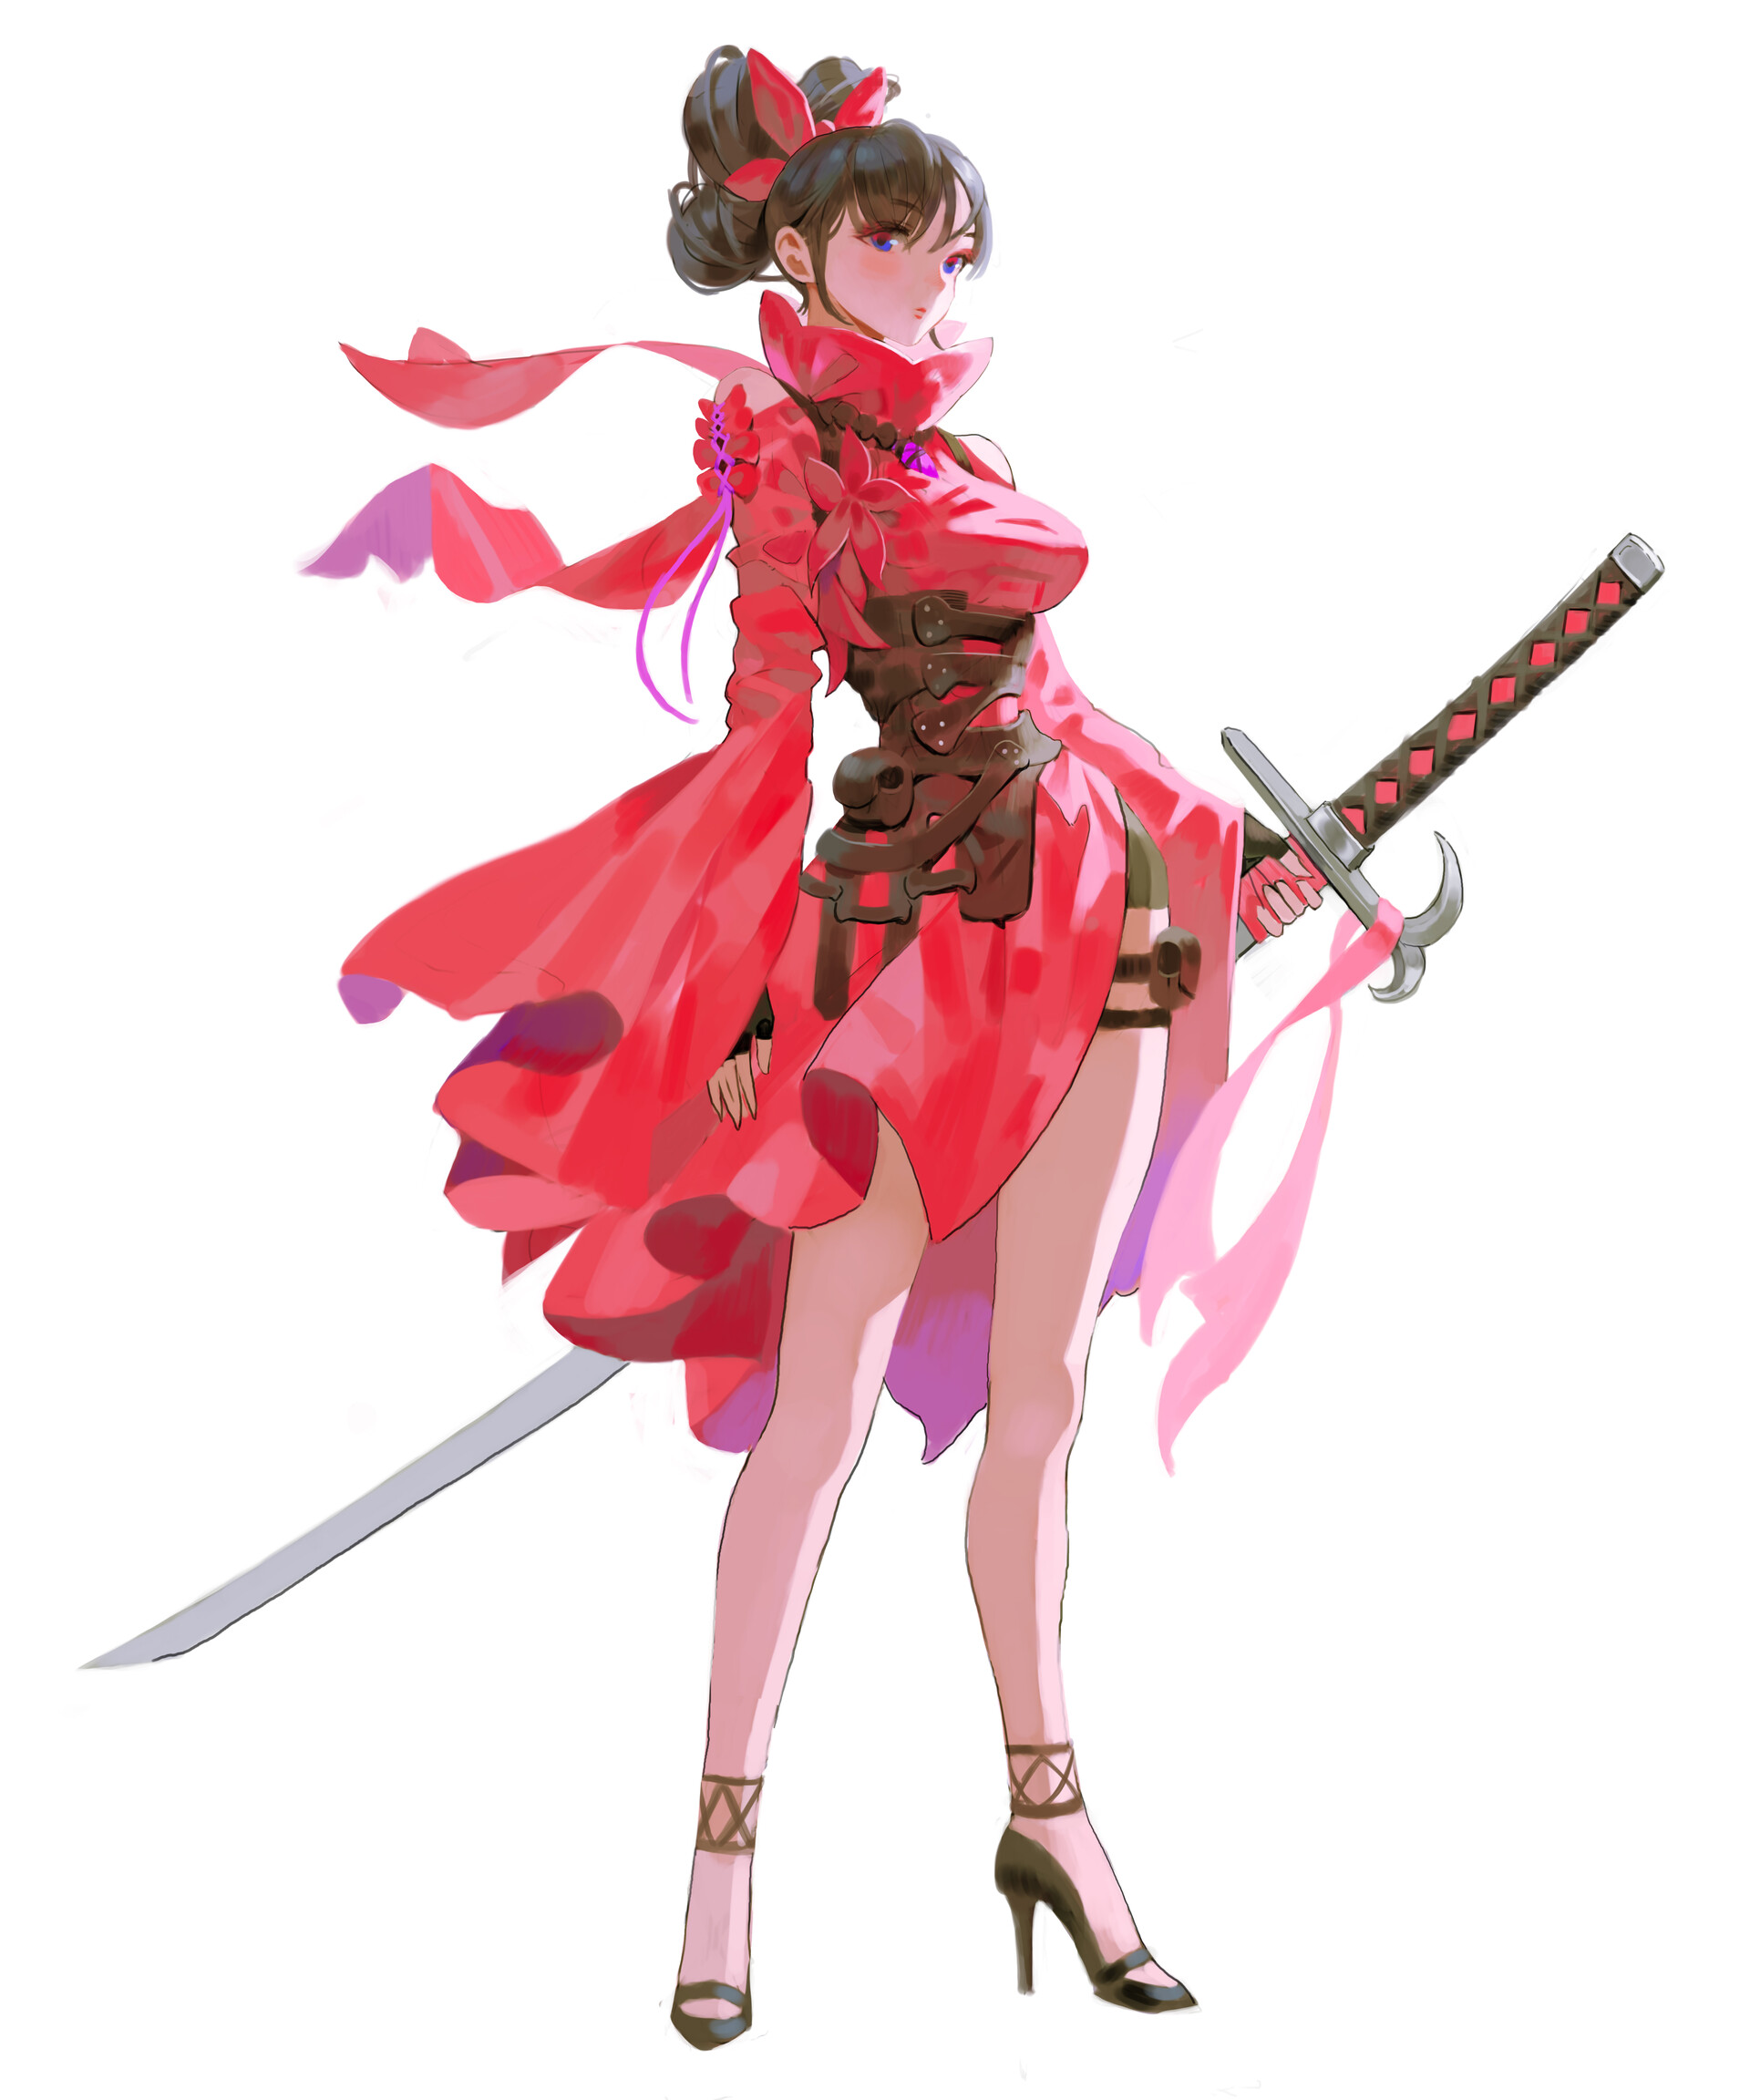 Anime 1920x2304 anime anime girls women fantasy art fantasy girl sword weapon women with swords brunette standing dress red dress red clothing heels black heels white background simple background looking at viewer legs